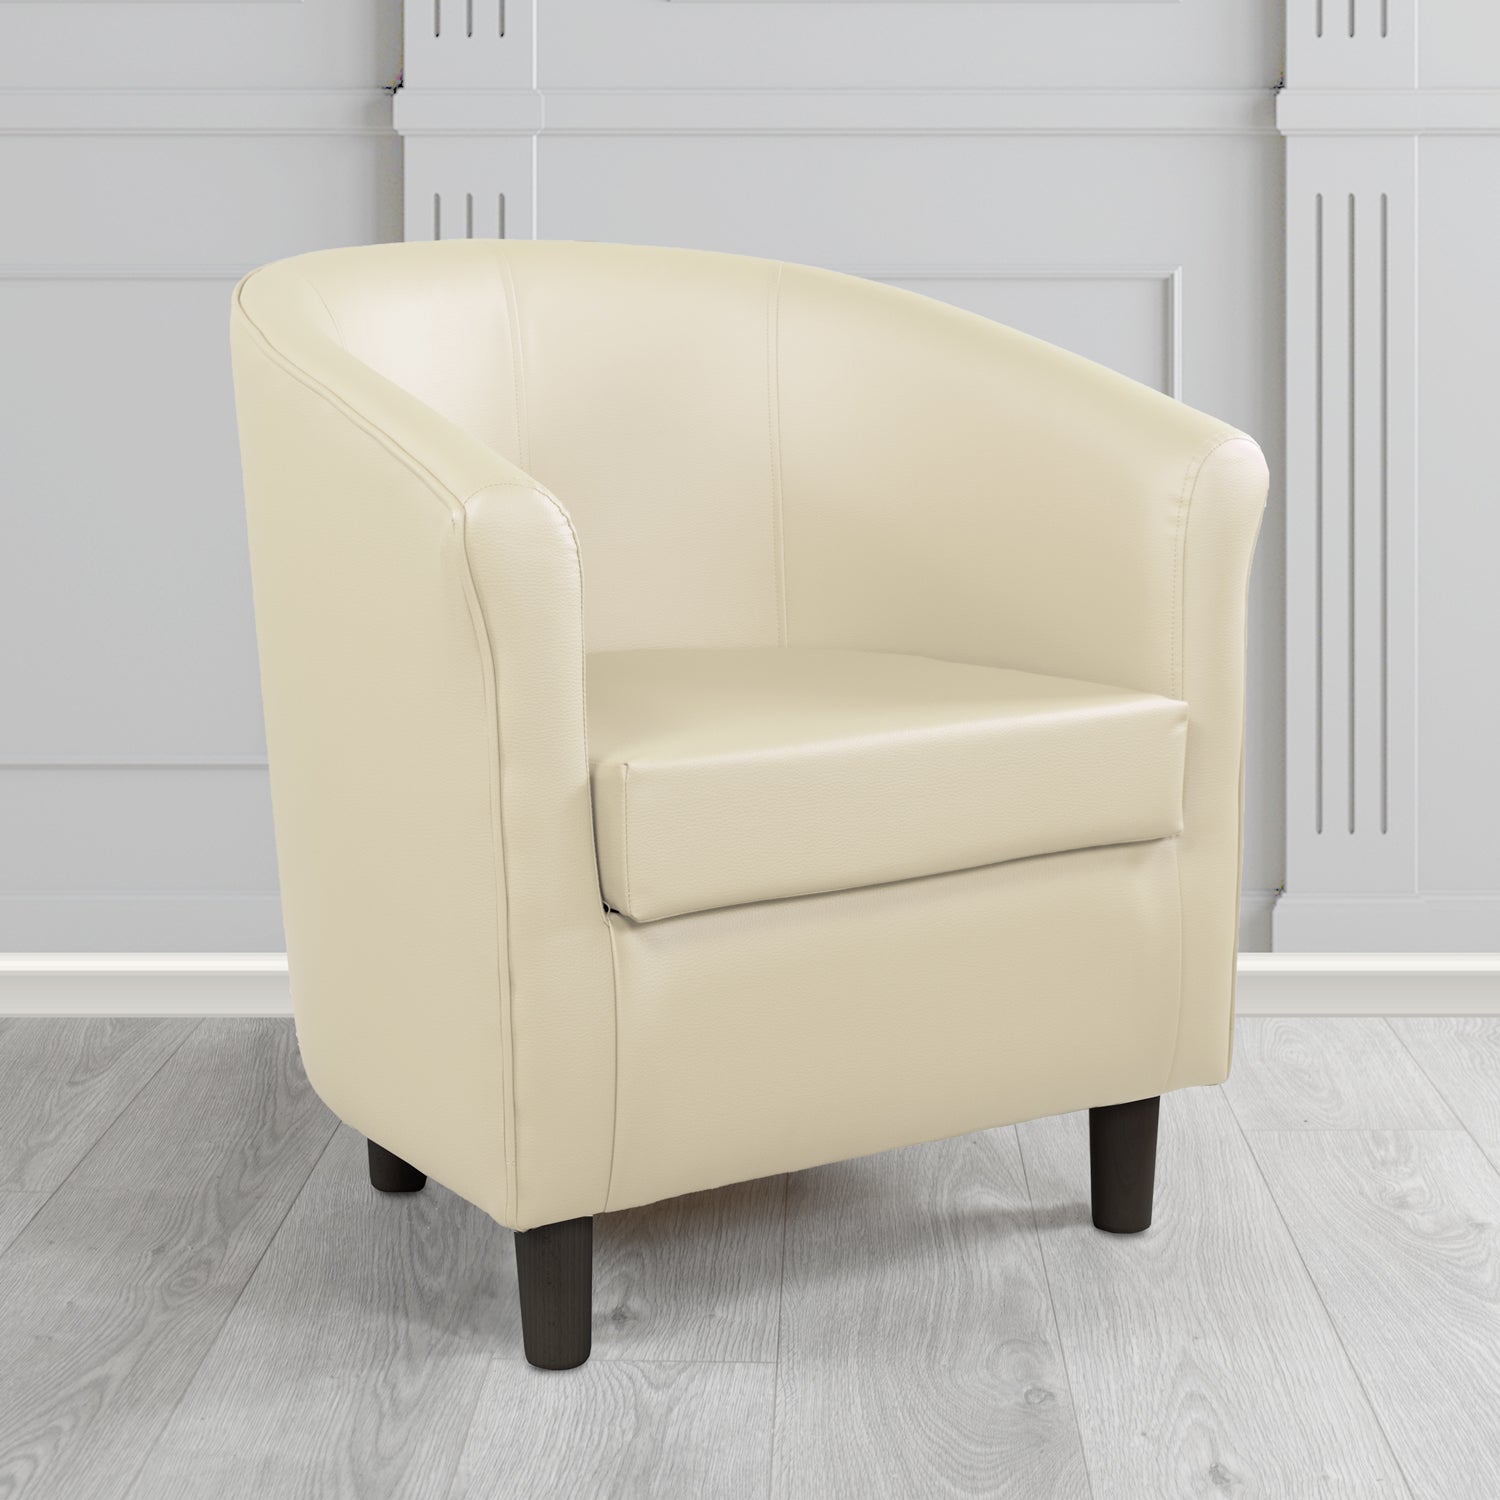 Tuscany Tub Chair in Madrid Cream Faux Leather